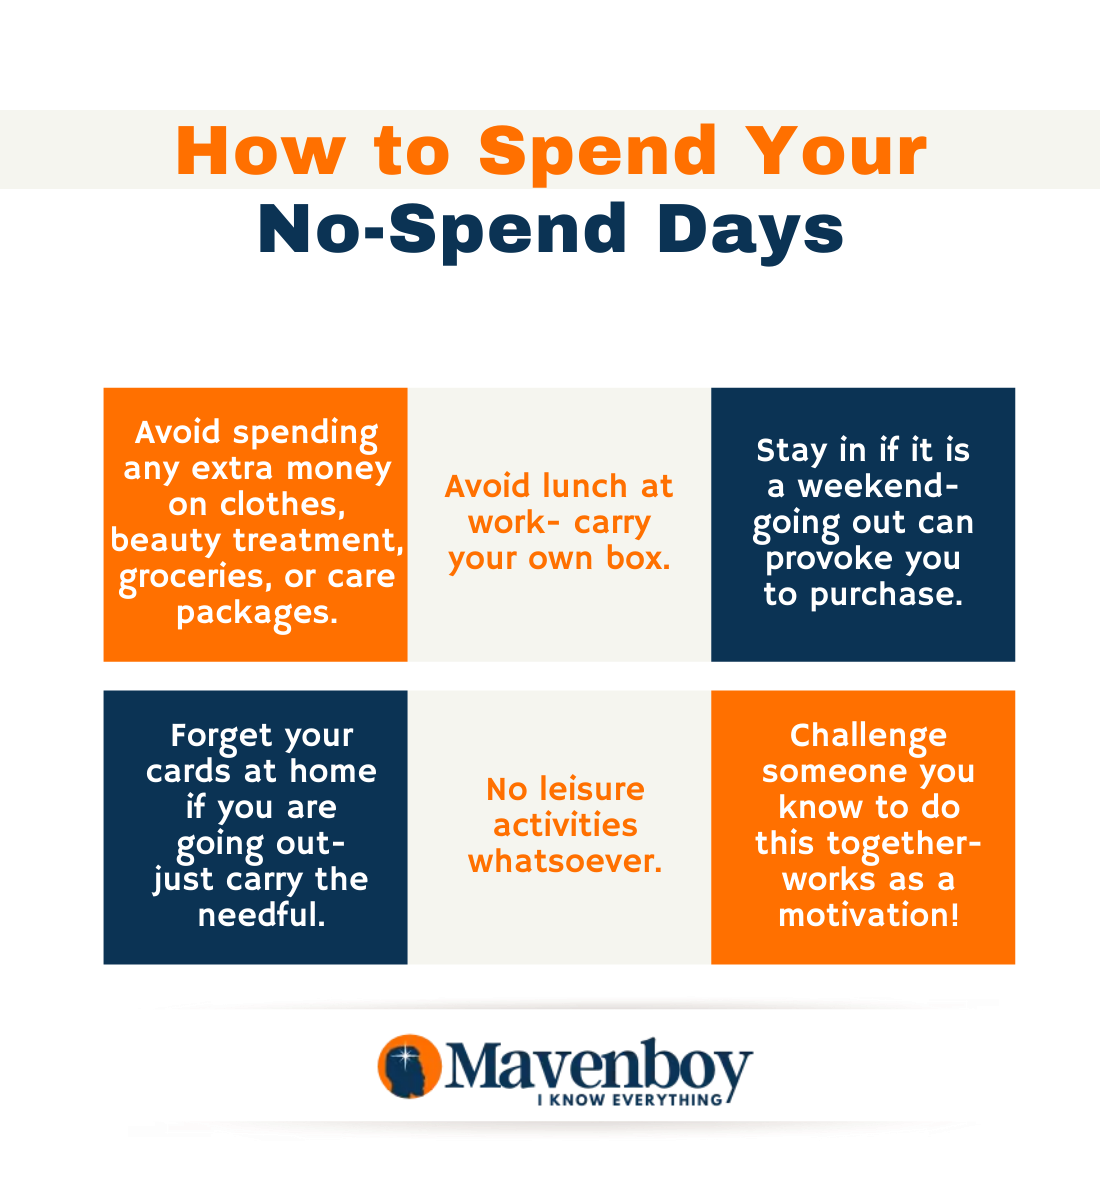 How to Spend Your No-Spend Days